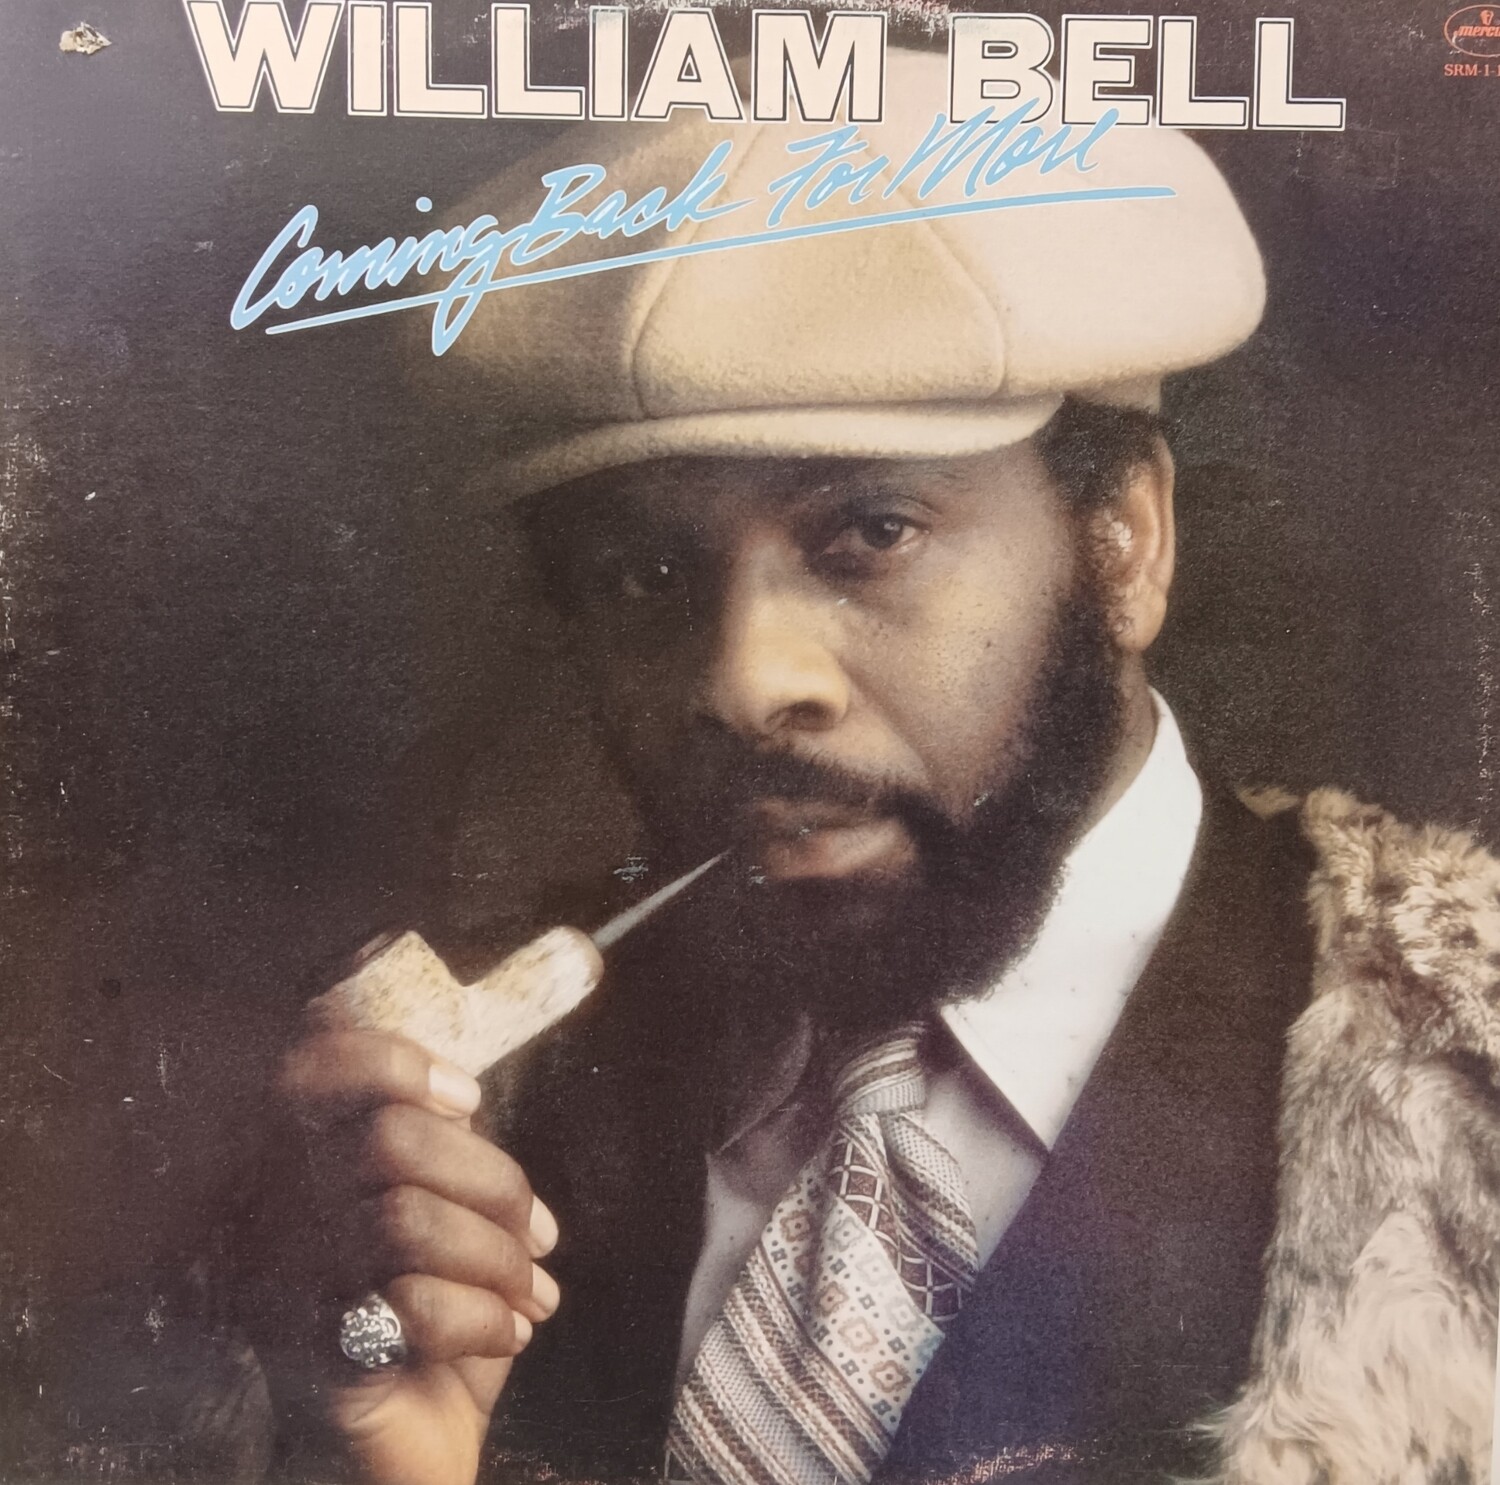 WILLIAM BELL - Coming back for more